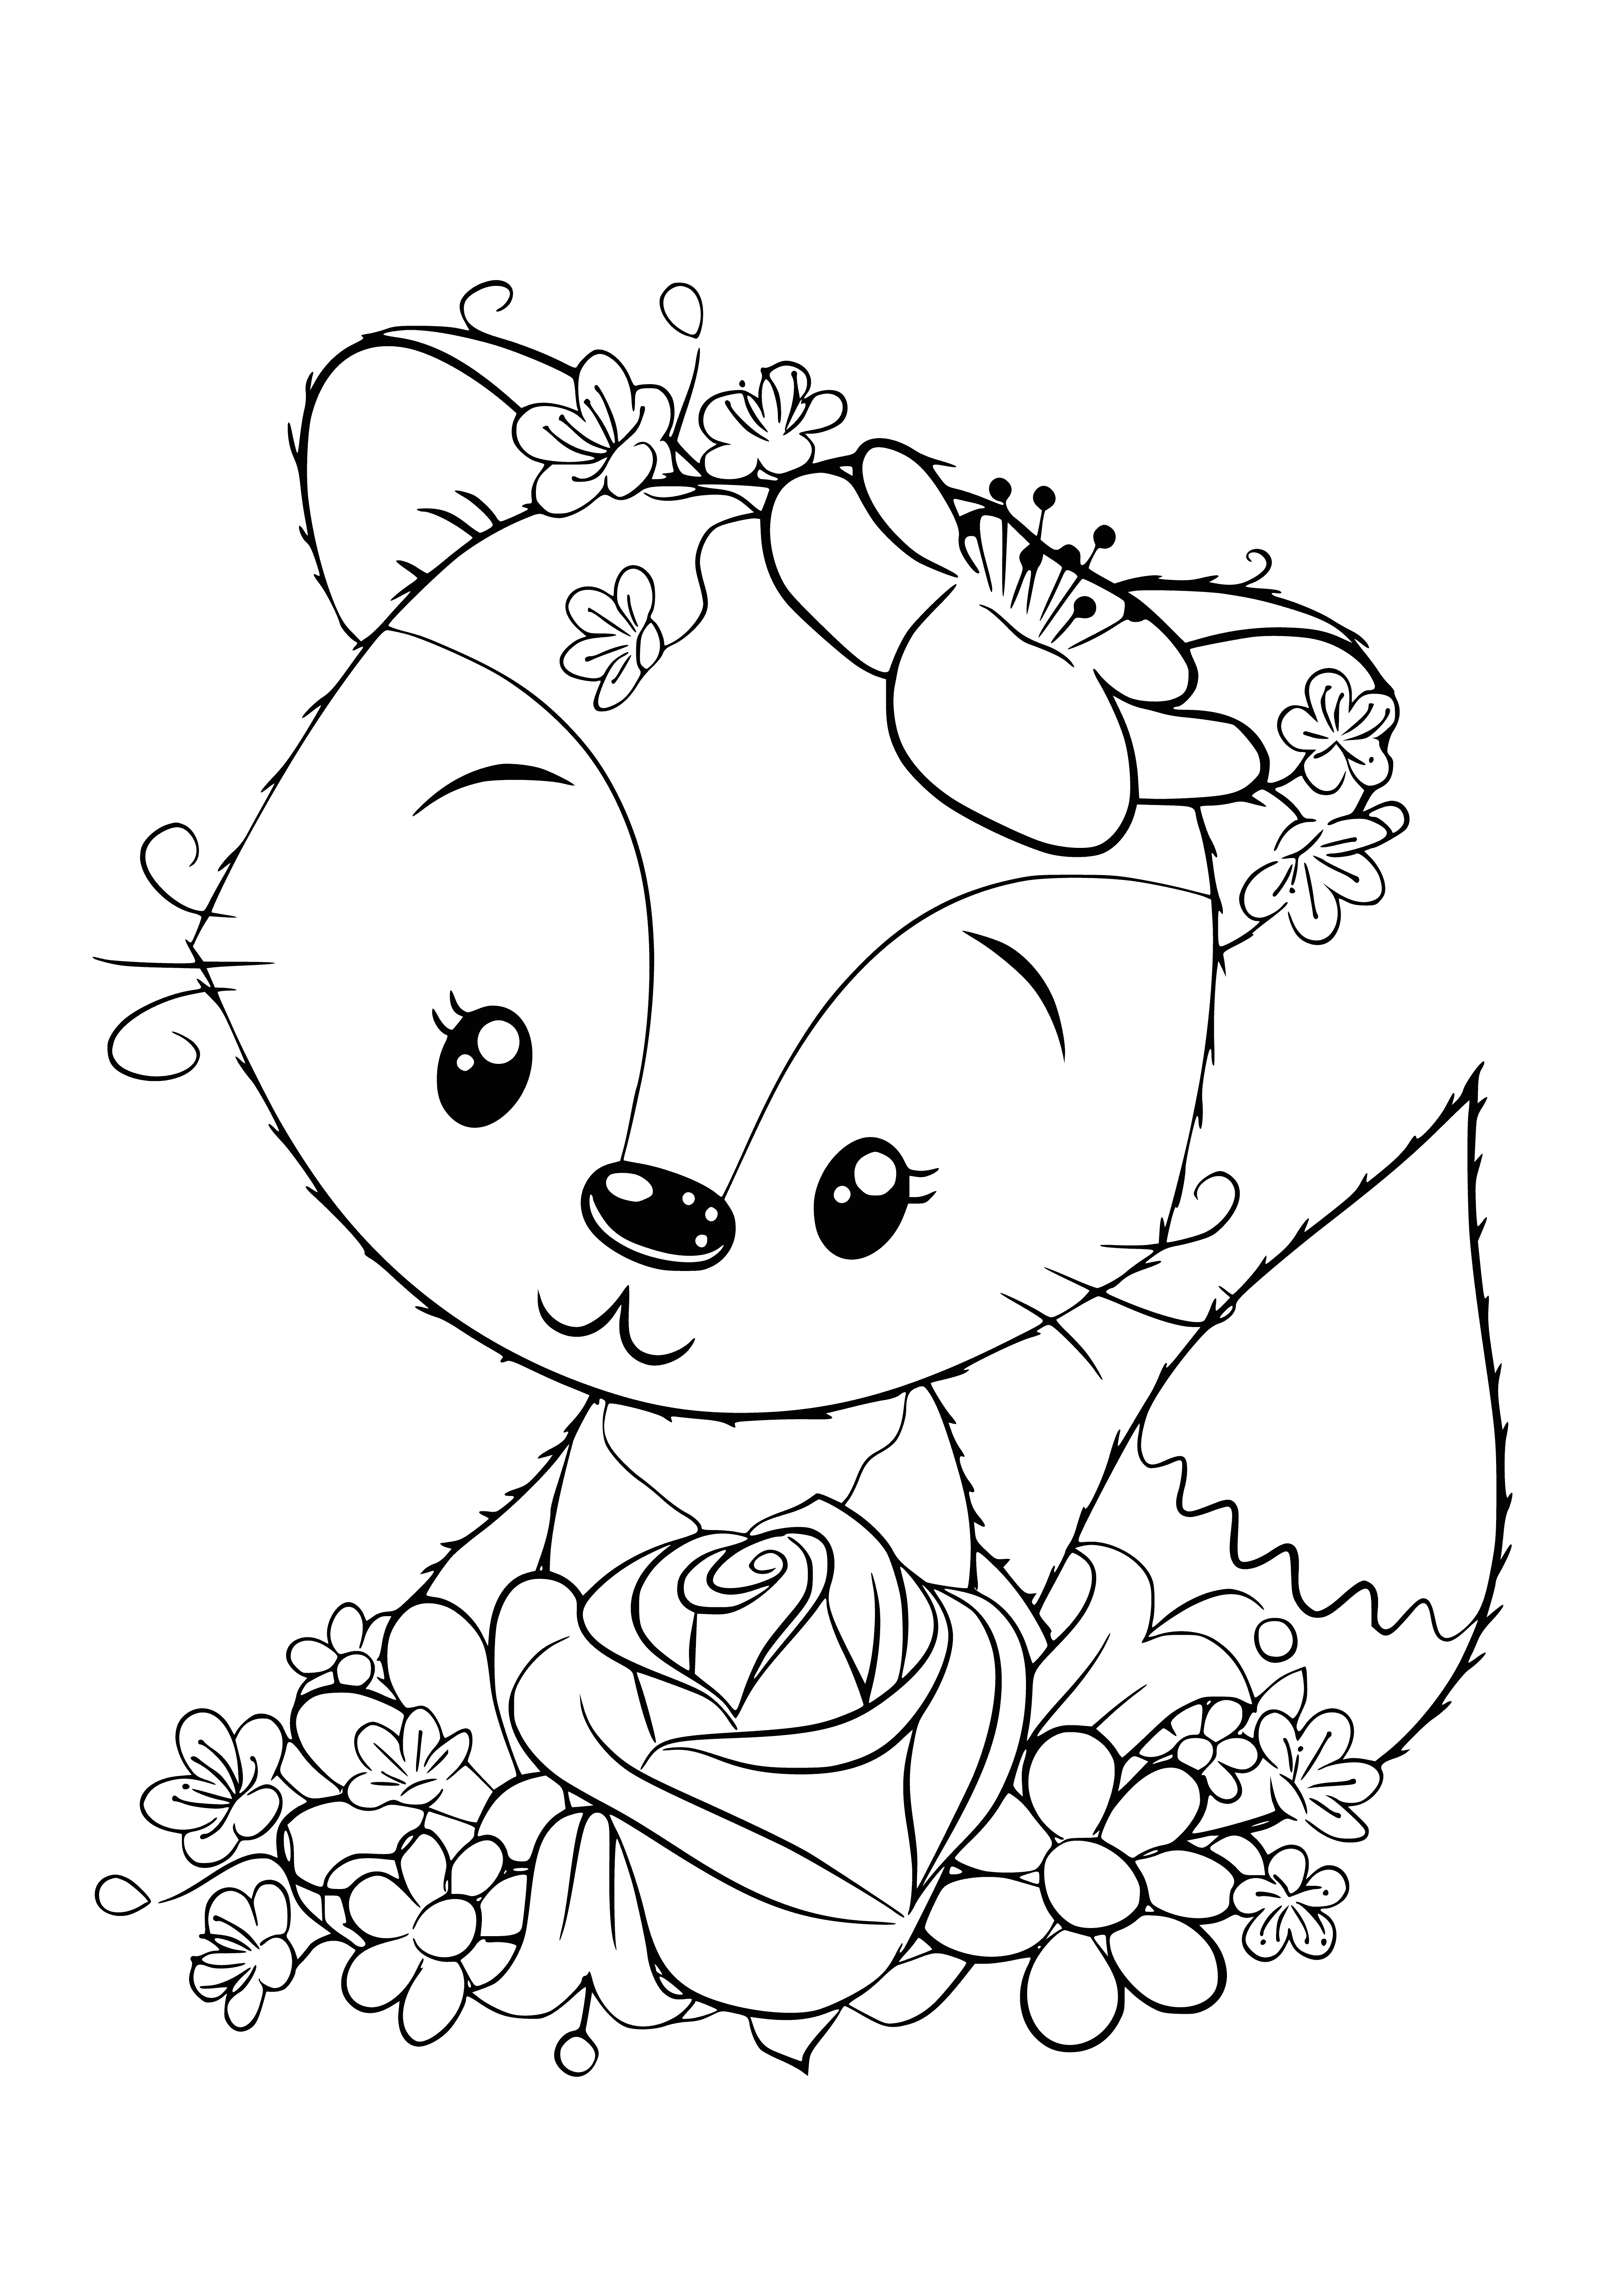 coloring page: Cute fox with big ears, black eyes, and black tail is smiling in Kawaii cute coloring page. #coloringpages #kawaii